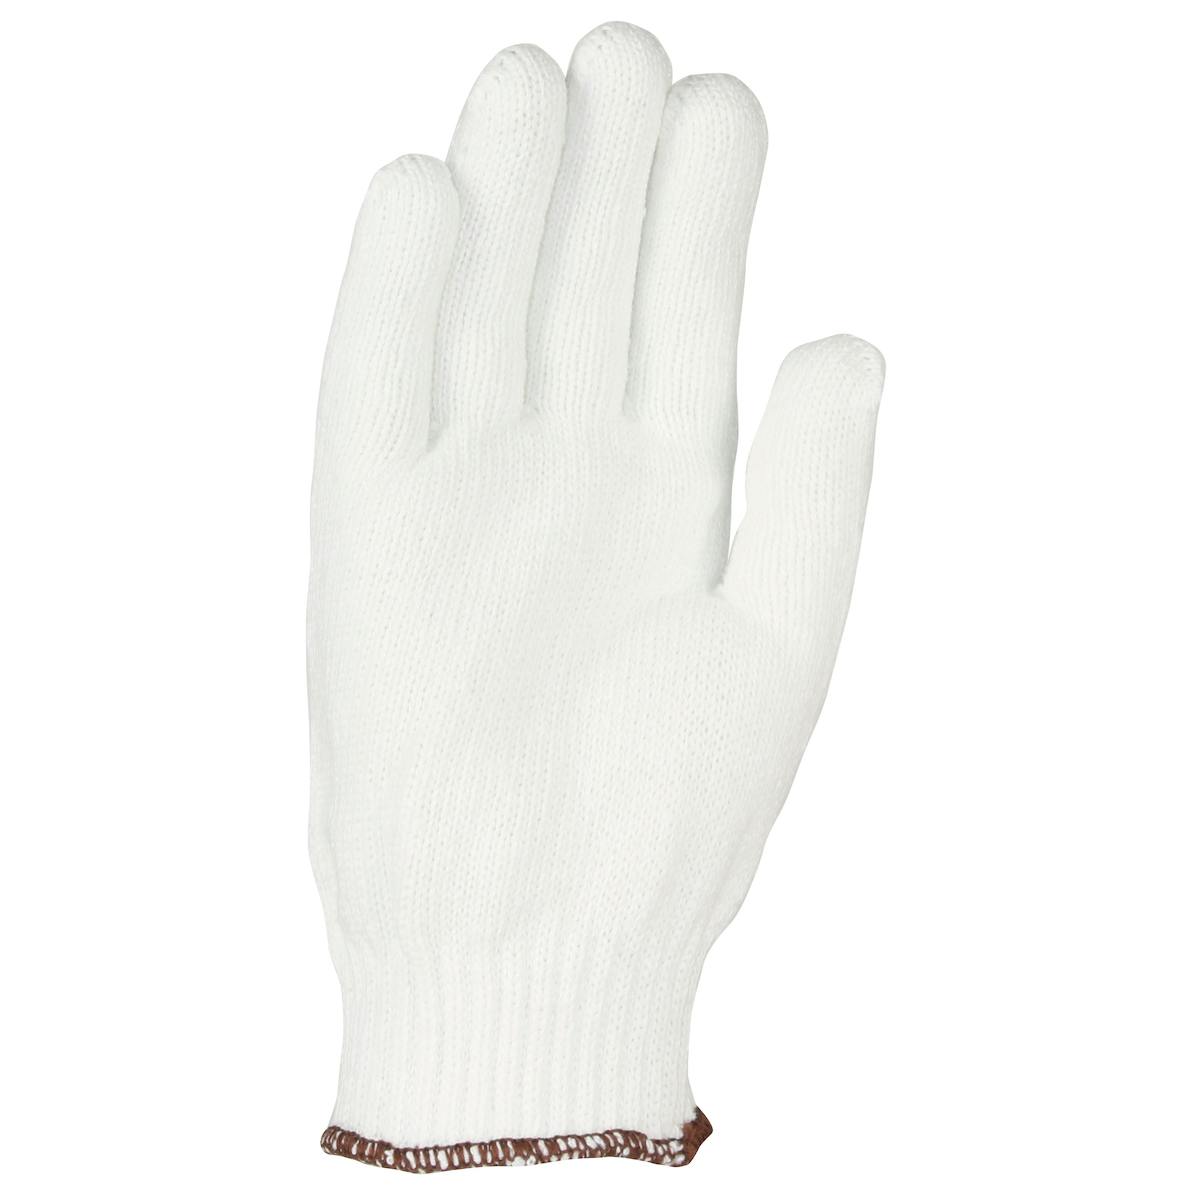 PIP® Seamless Knit Cotton and Polyester Glove - Heavy Weight (MP35)_0